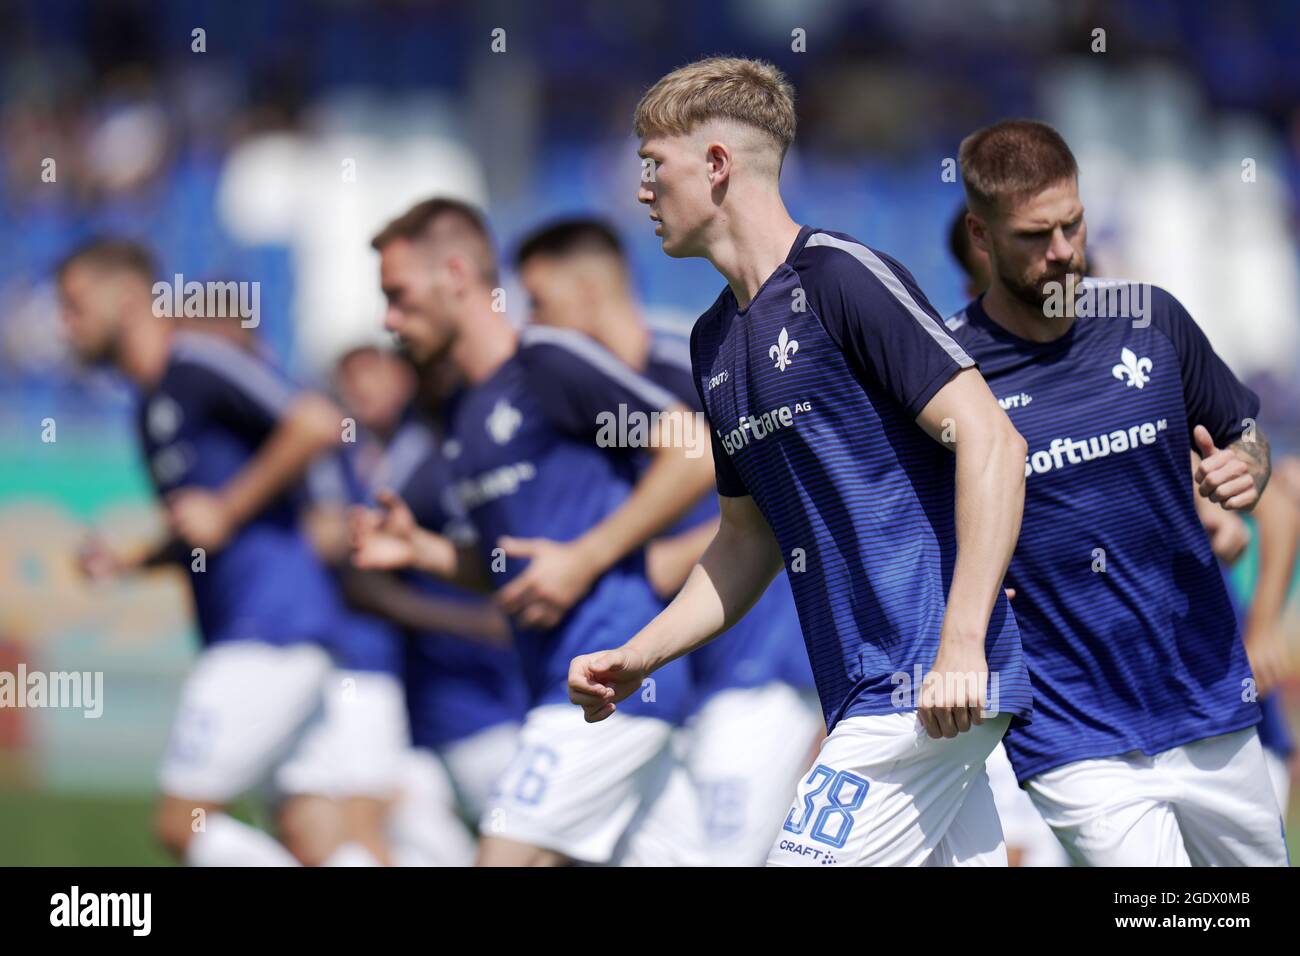 Darmstadt, Germany. 15th Aug, 2021. Soccer: 2nd Bundesliga, Darmstadt 98 - FC Ingolstadt 04, Matchday 3 at Merck-Stadion am Böllenfalltor. Darmstadt's Clemens Riedel (front) during warm-up training. Credit: Thomas Frey/dpa - IMPORTANT NOTE: In accordance with the regulations of the DFL Deutsche Fußball Liga and/or the DFB Deutscher Fußball-Bund, it is prohibited to use or have used photographs taken in the stadium and/or of the match in the form of sequence pictures and/or video-like photo series./dpa/Alamy Live News Stock Photo